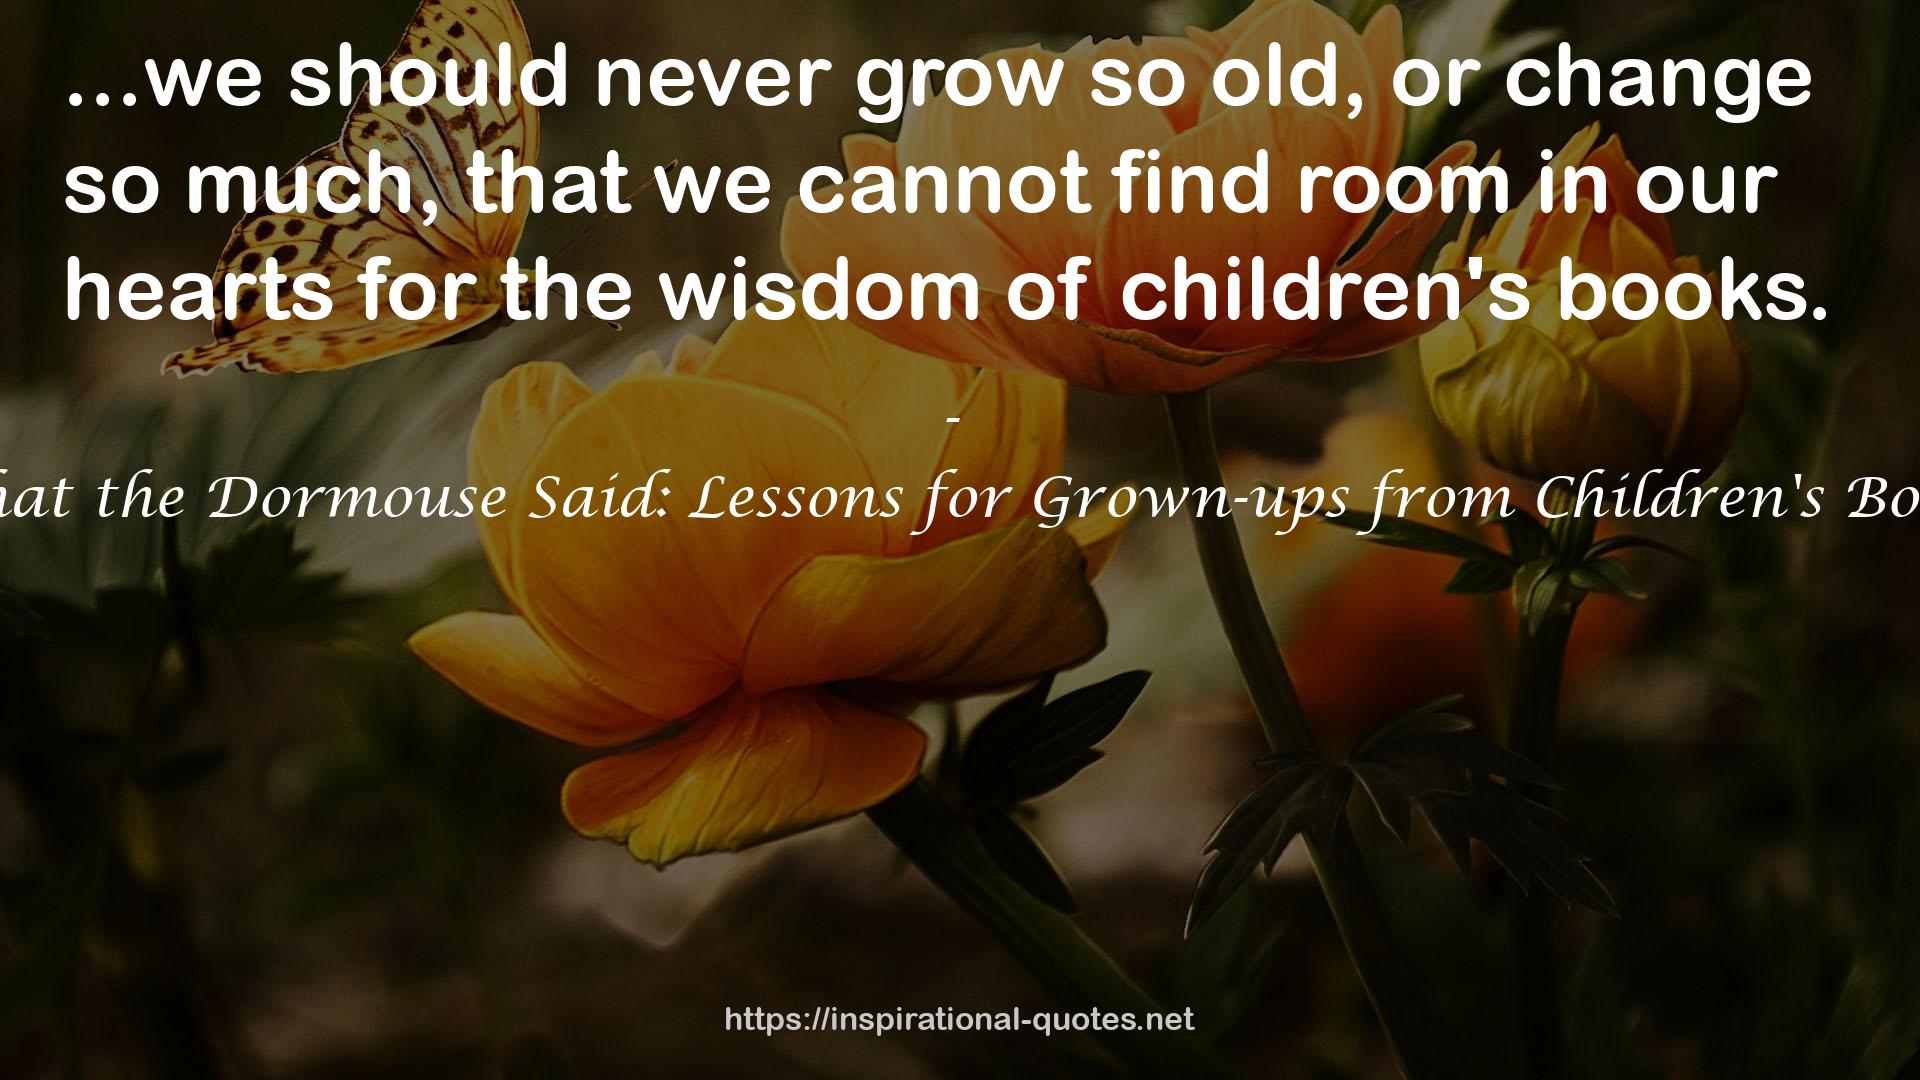 What the Dormouse Said: Lessons for Grown-ups from Children's Books QUOTES